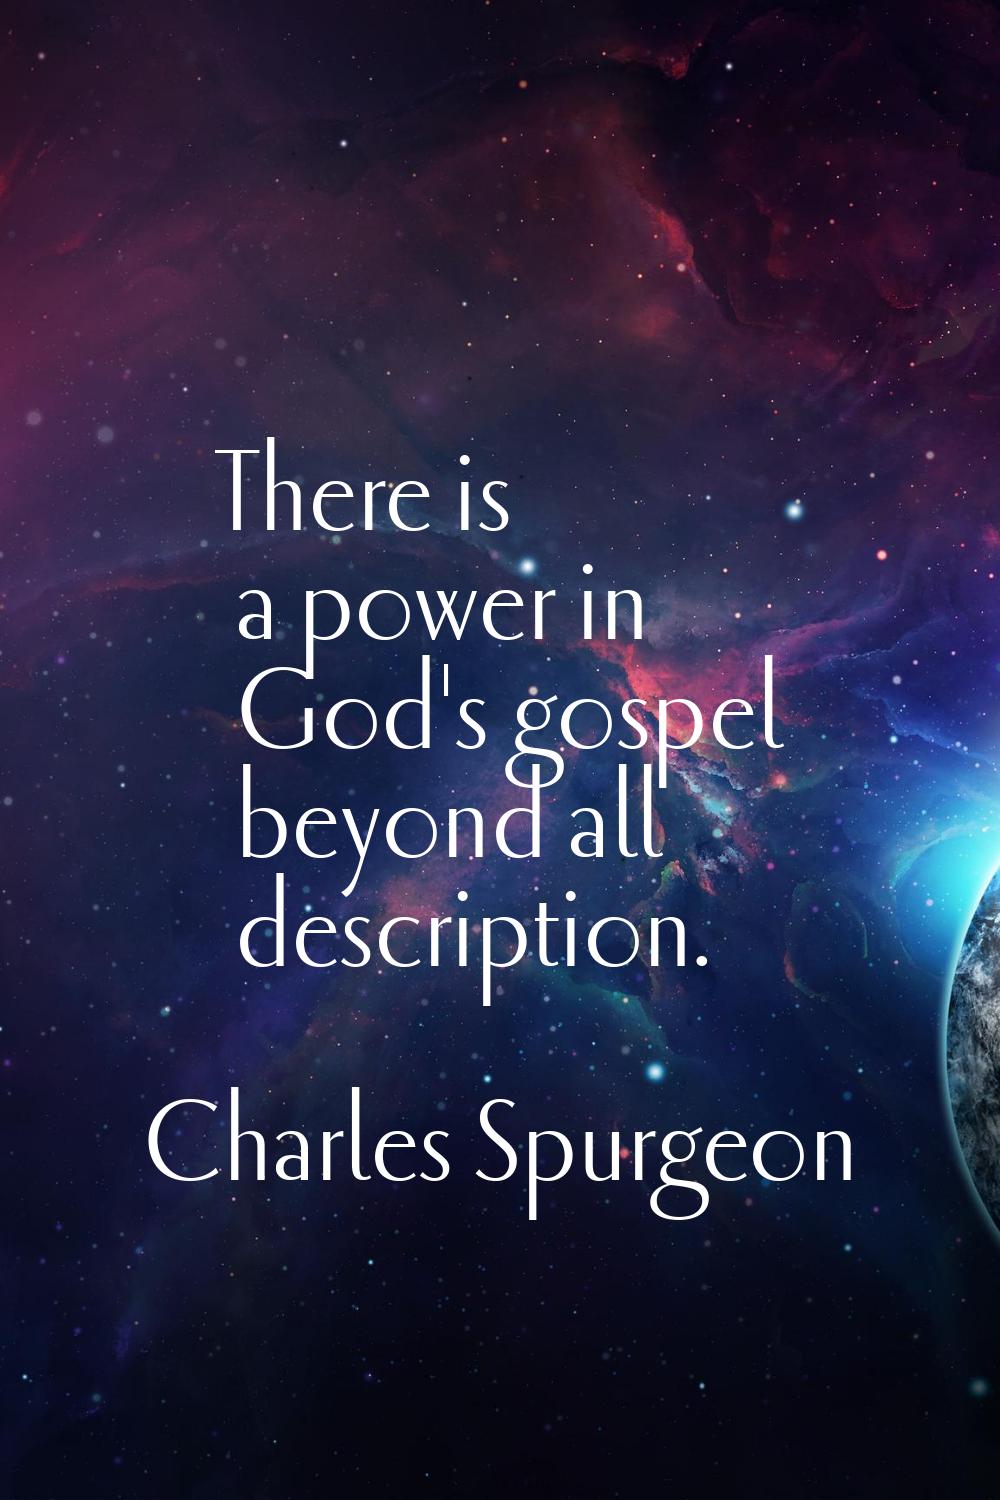 There is a power in God's gospel beyond all description.